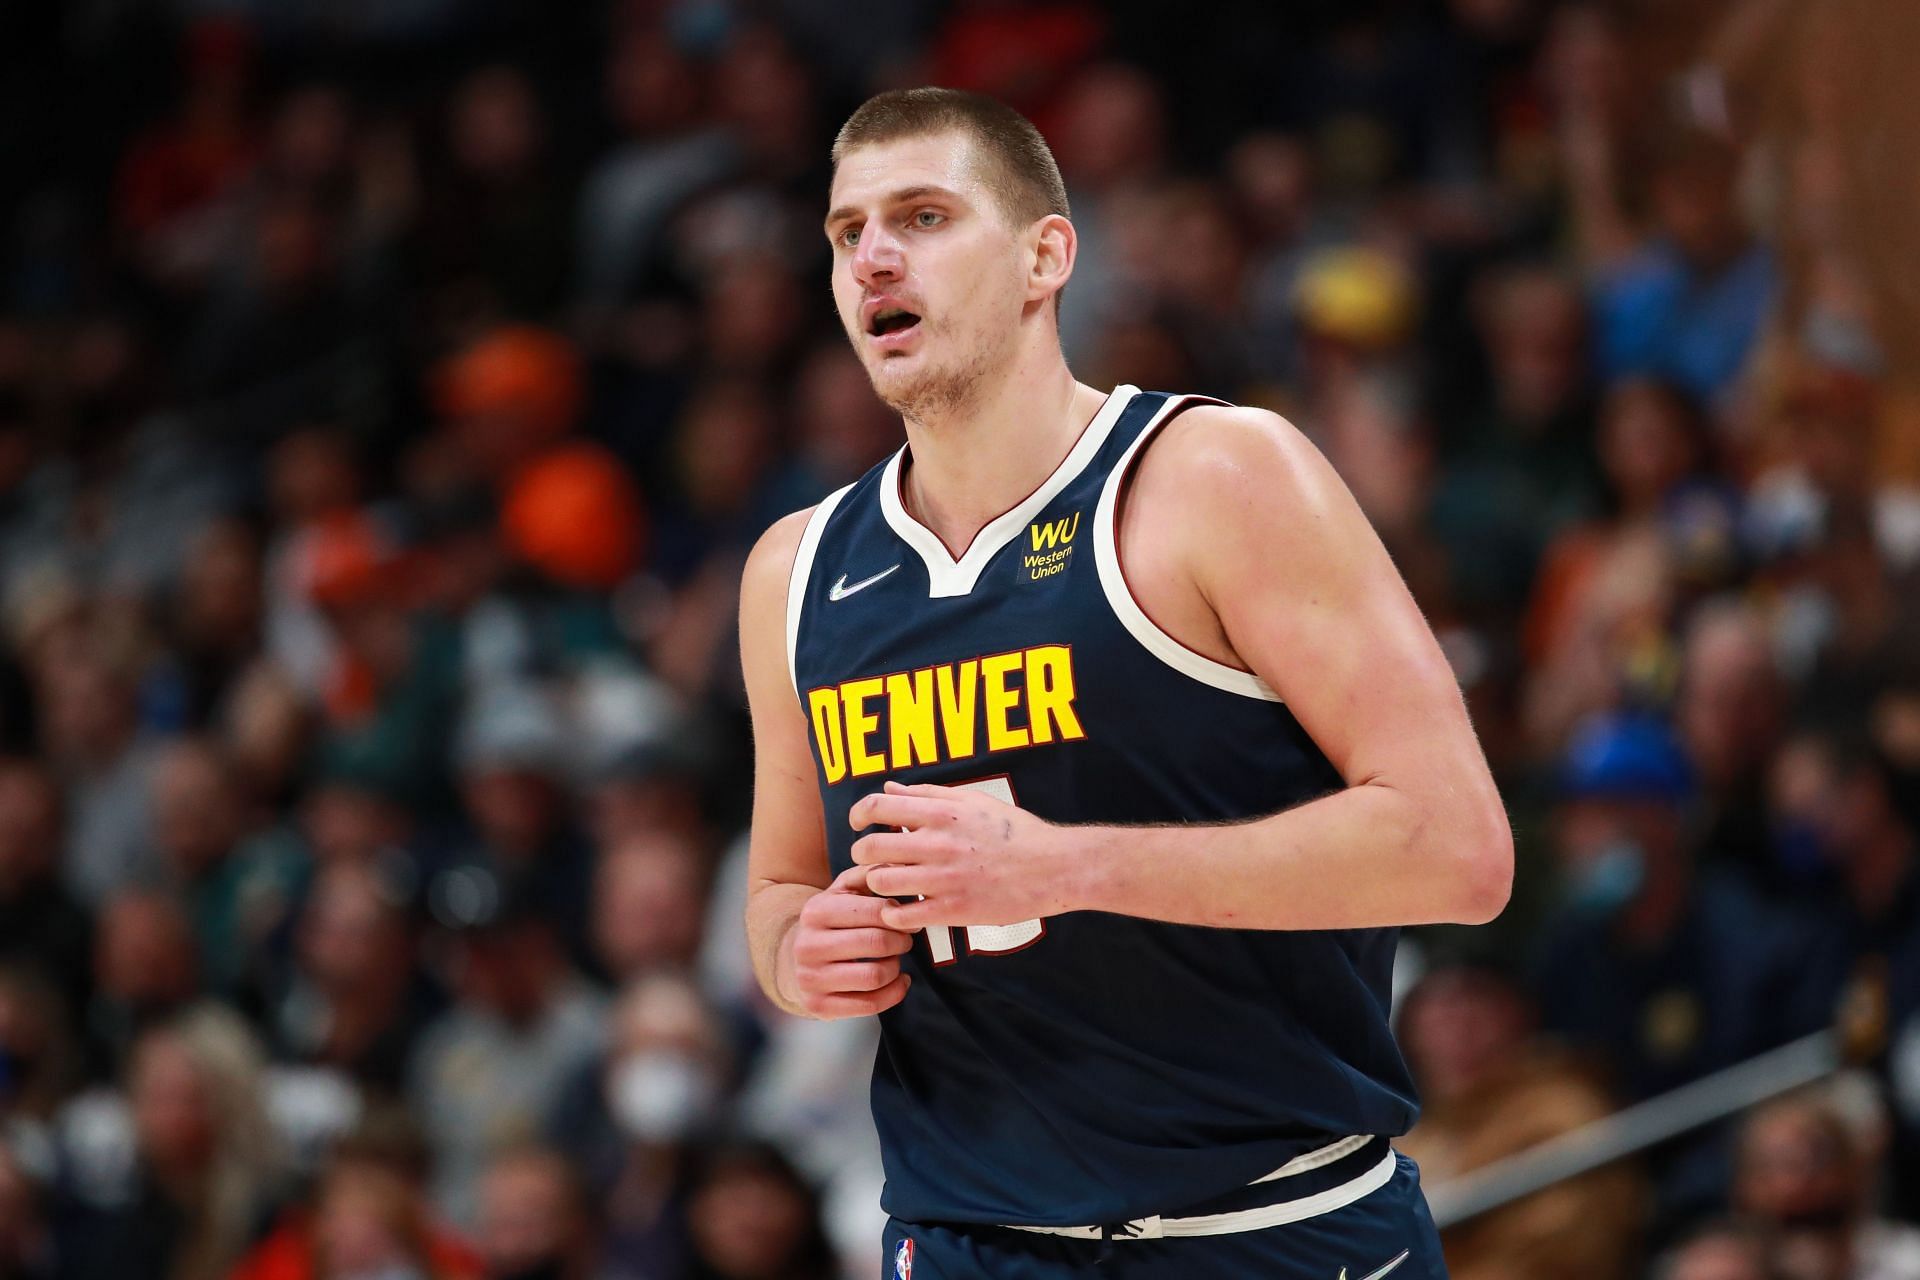 Nikola Jokic #15 of the Denver Nuggets runs down the court during the game against the Portland Trail Blazers at Ball Arena on November 14, 2021 in Denver, Colorado.